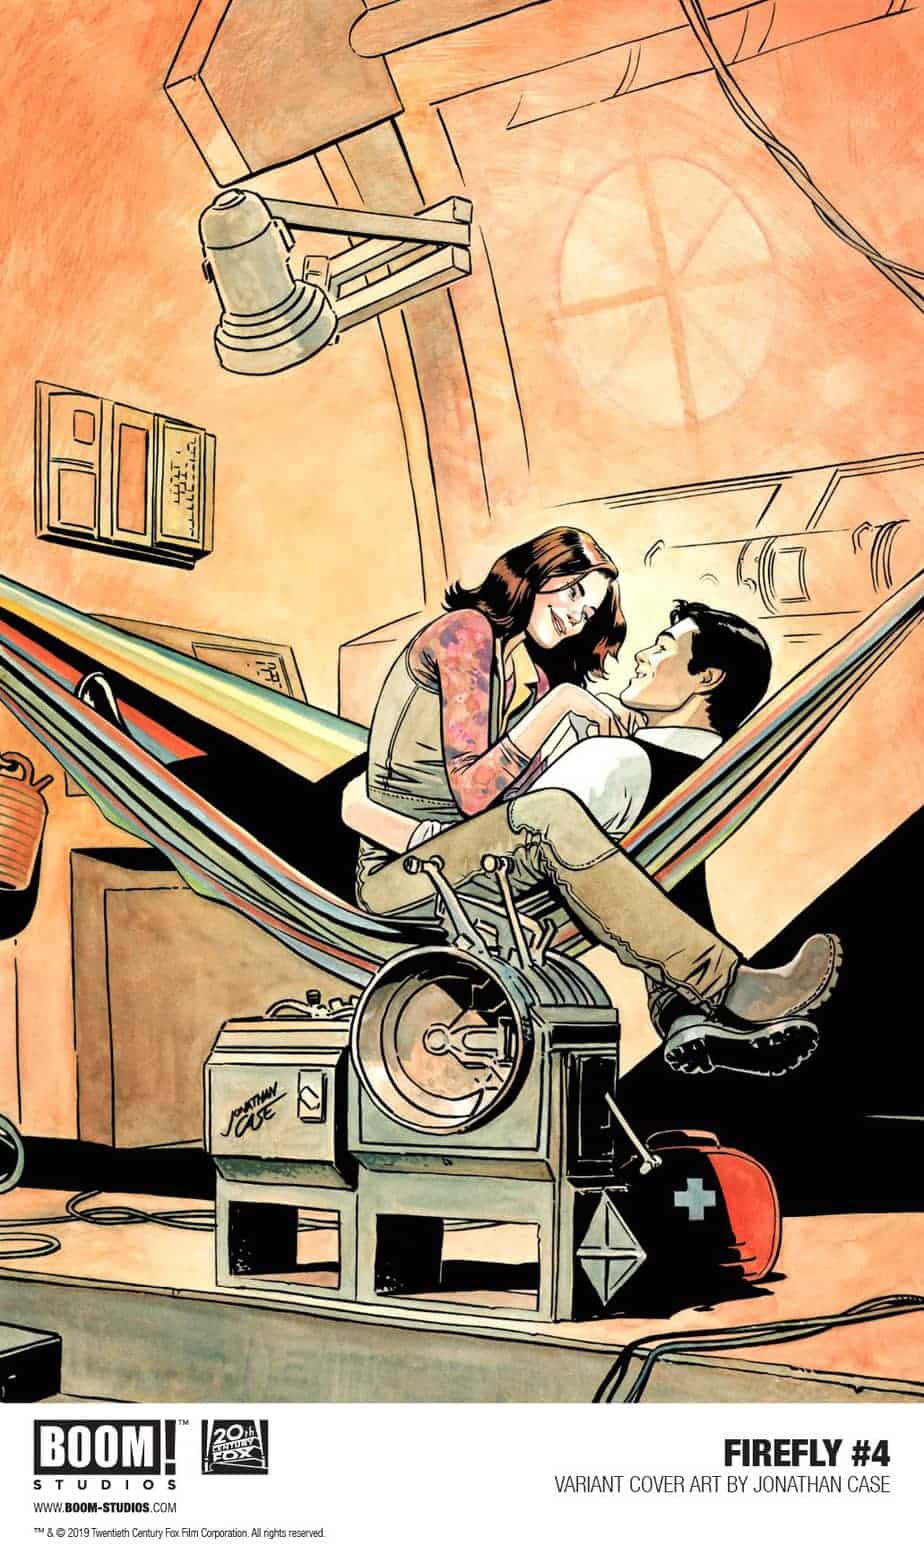 FIREFLY #4 - Variant Cover by Jonathan Case